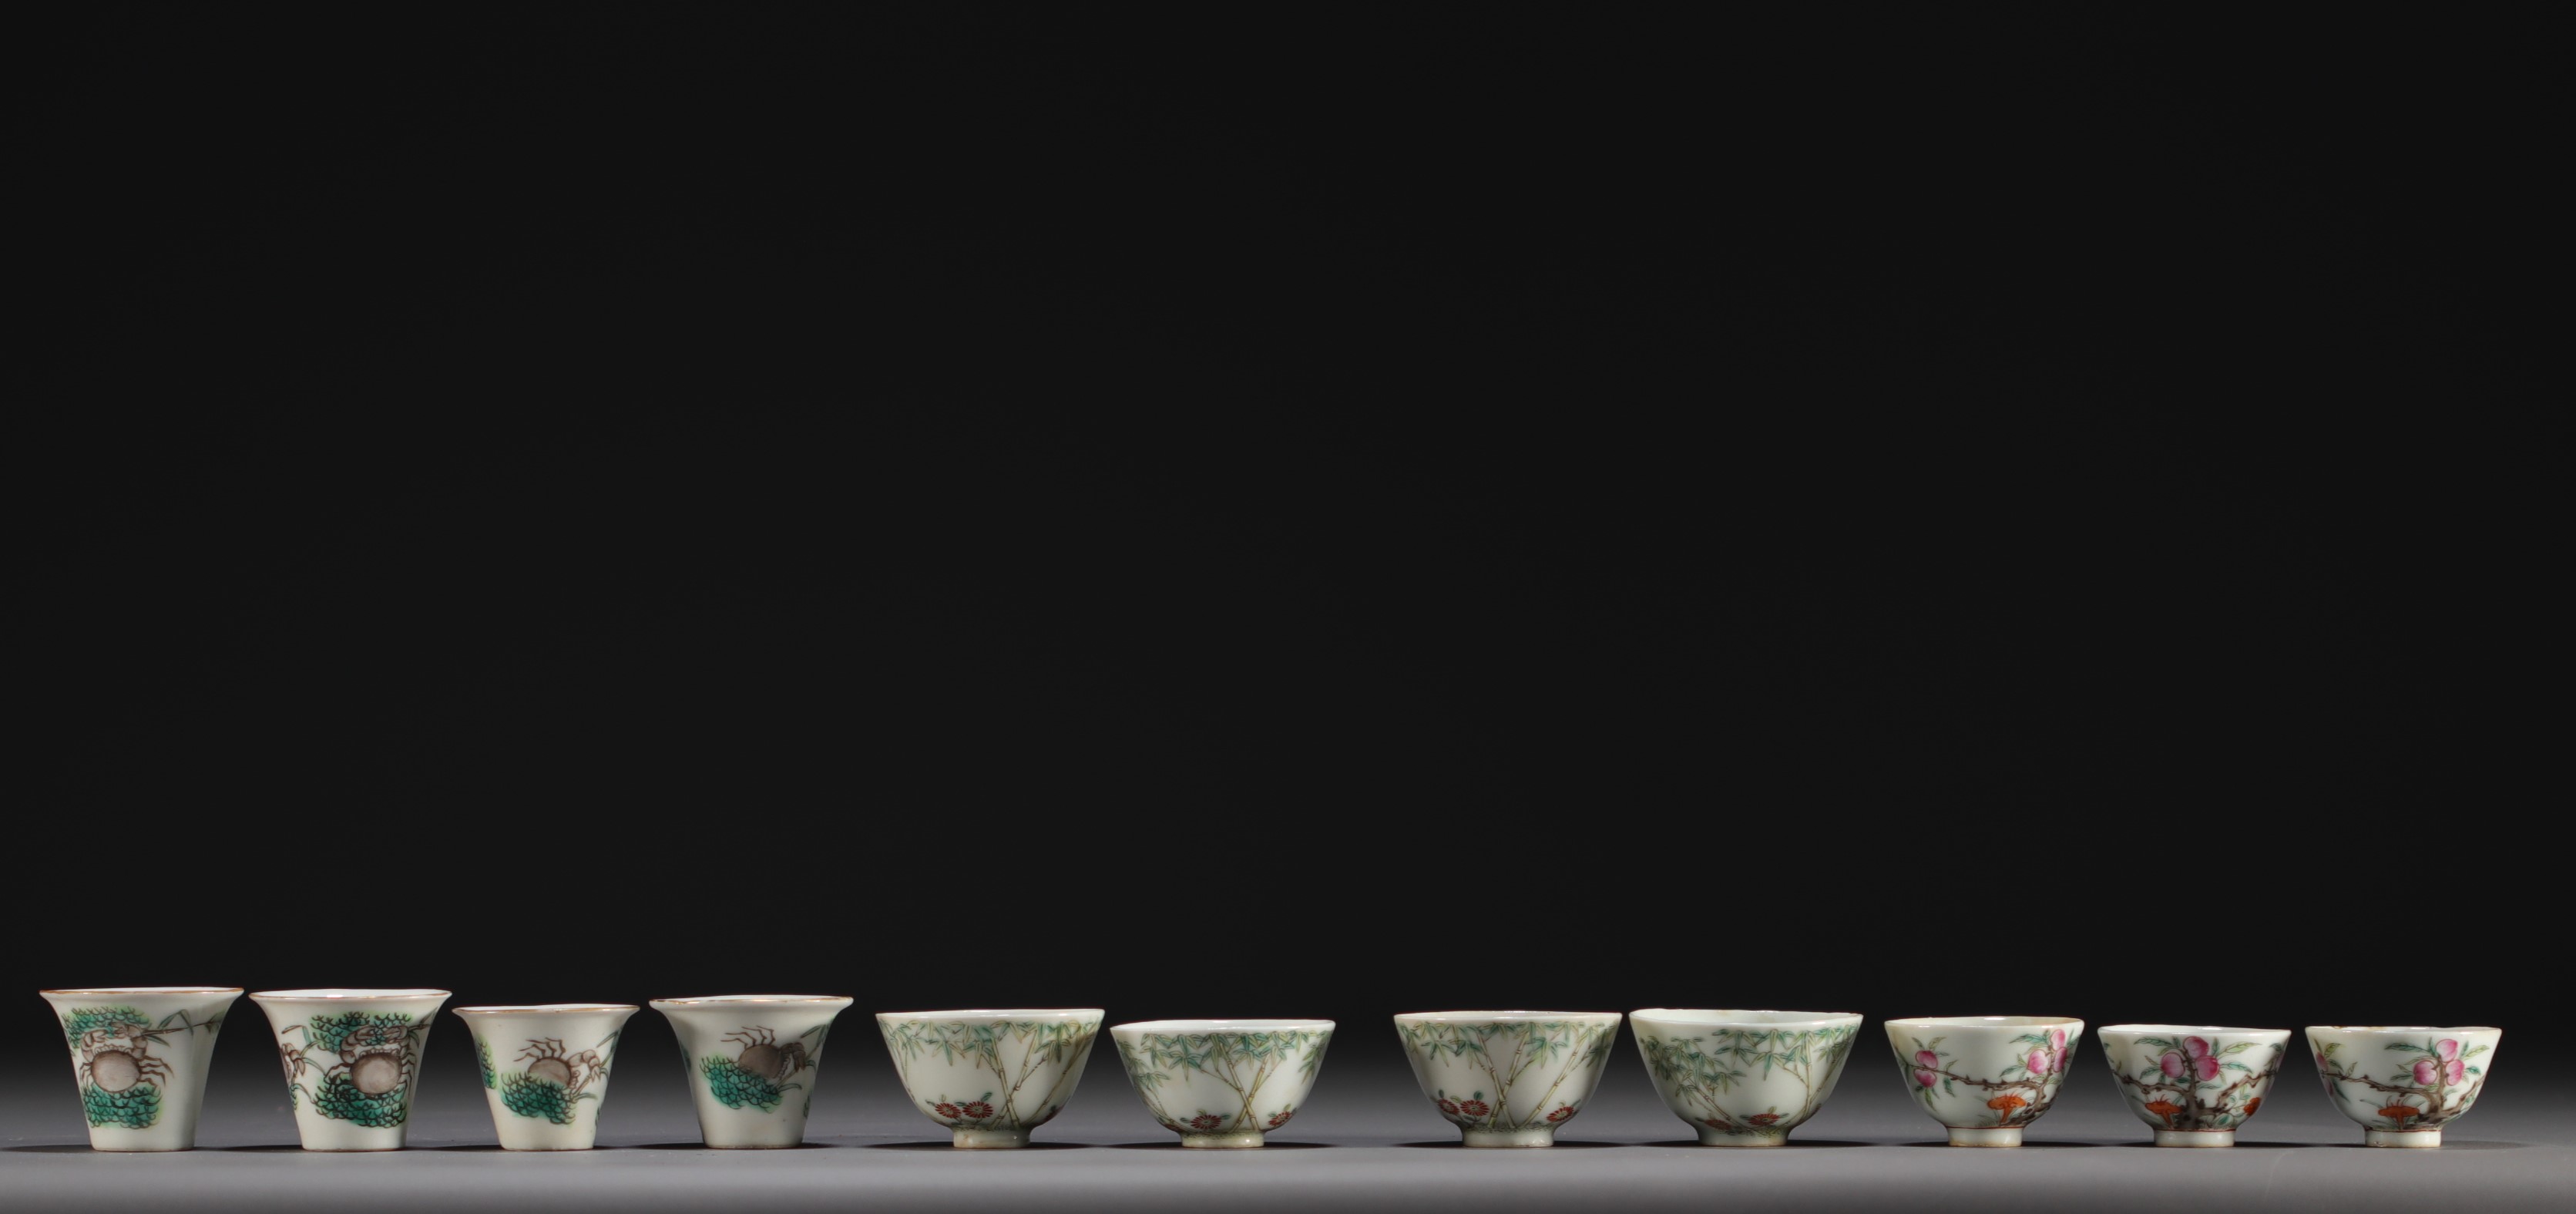 China - Set of eleven bowls of different sizes in famille rose porcelain, 19th century.